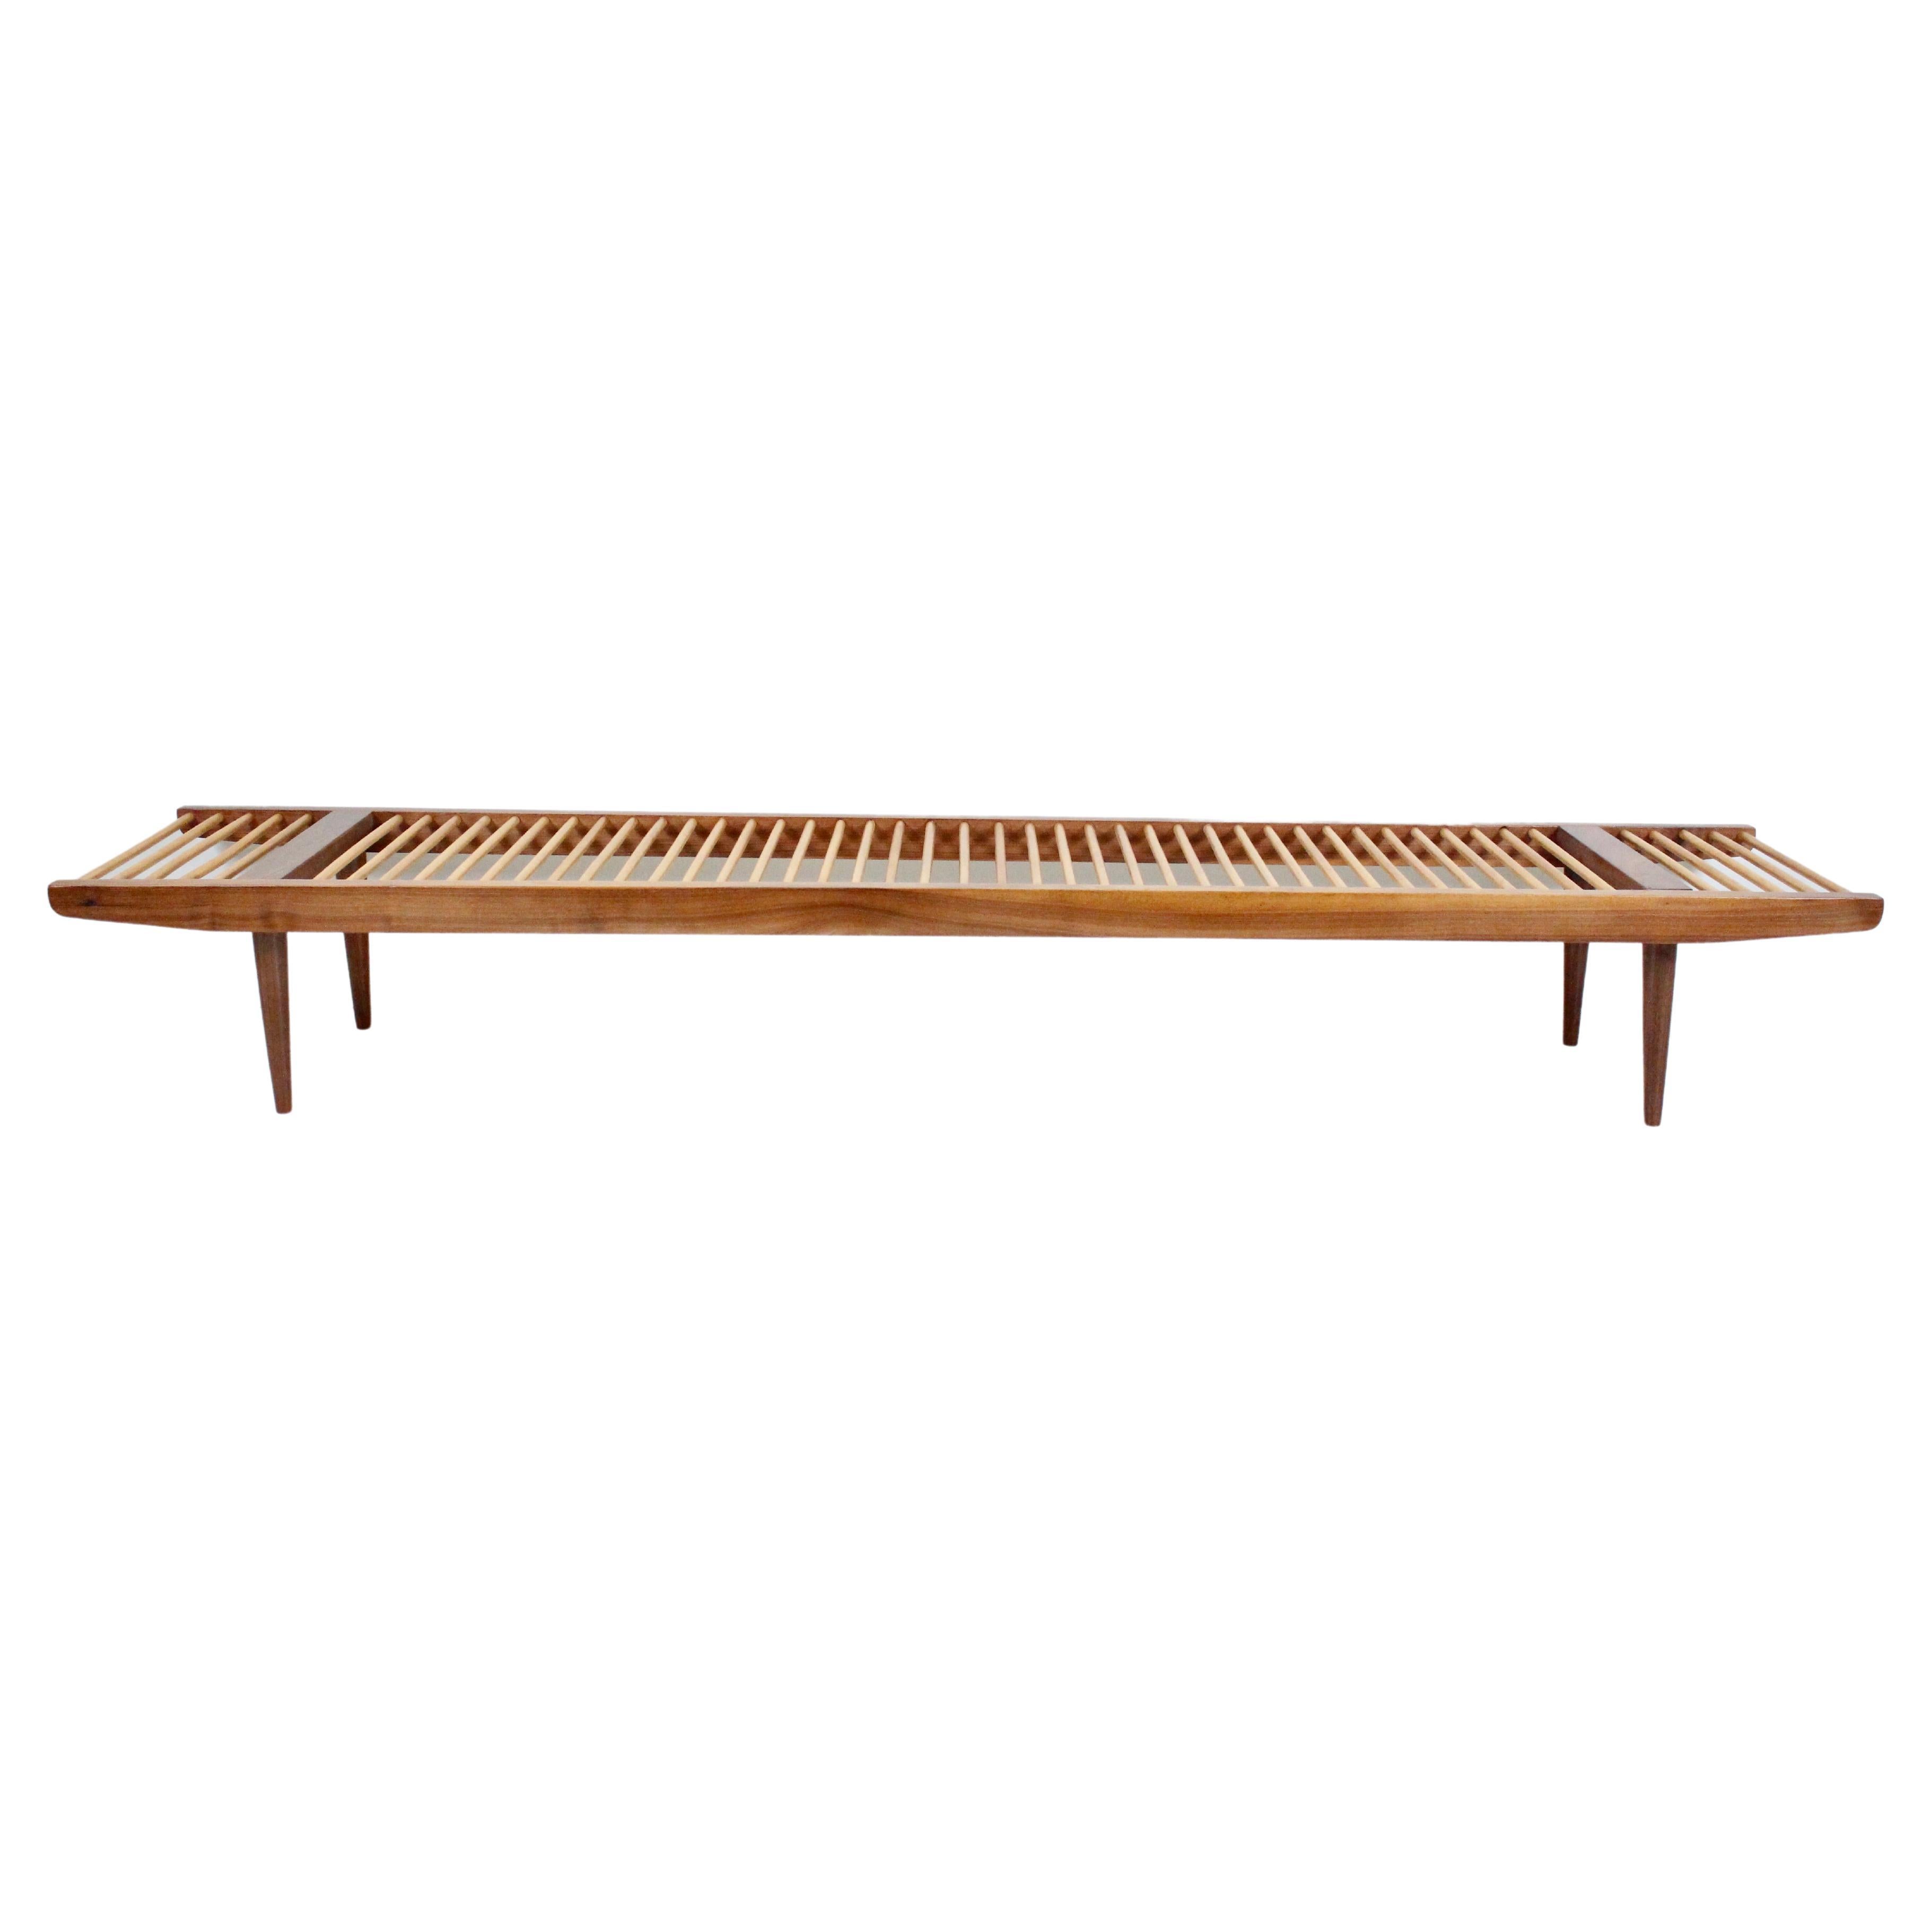 Milo Baughman Walnut and Maple Long Dowel Bench, 1950s For Sale